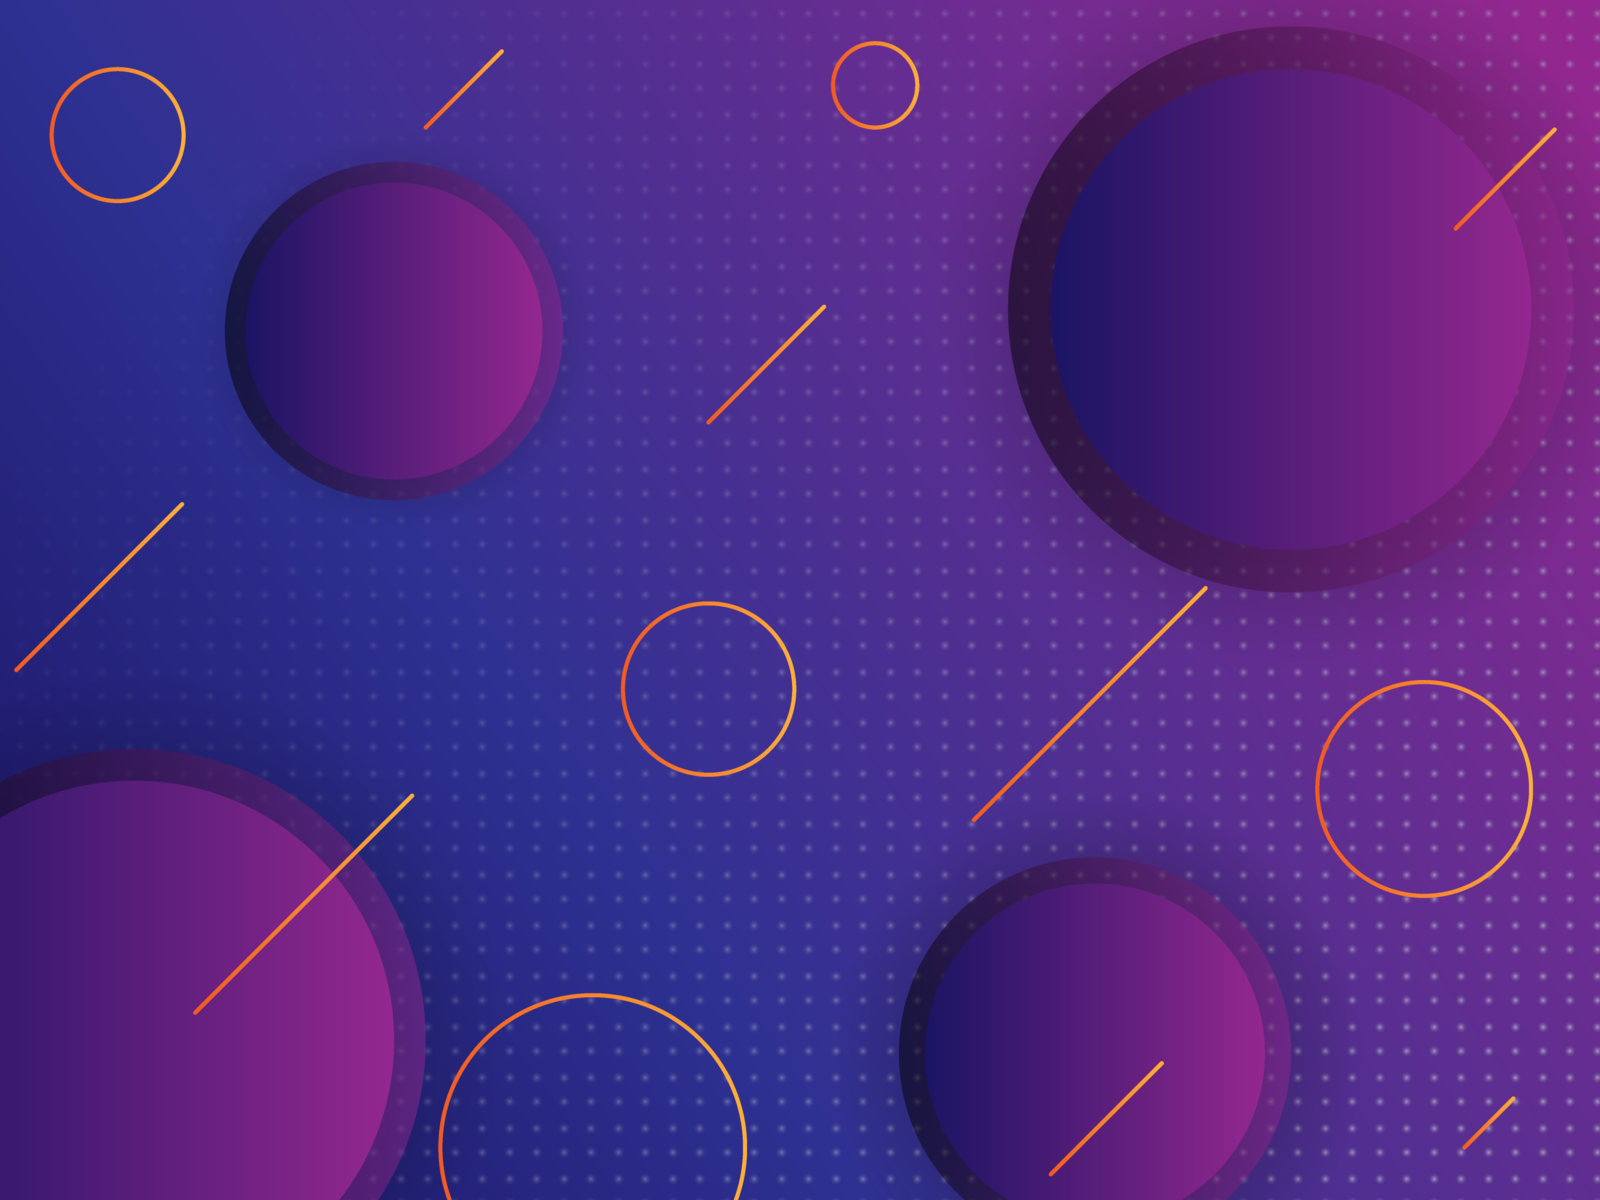 Abstract Background by Nonso Okolo on Dribbble